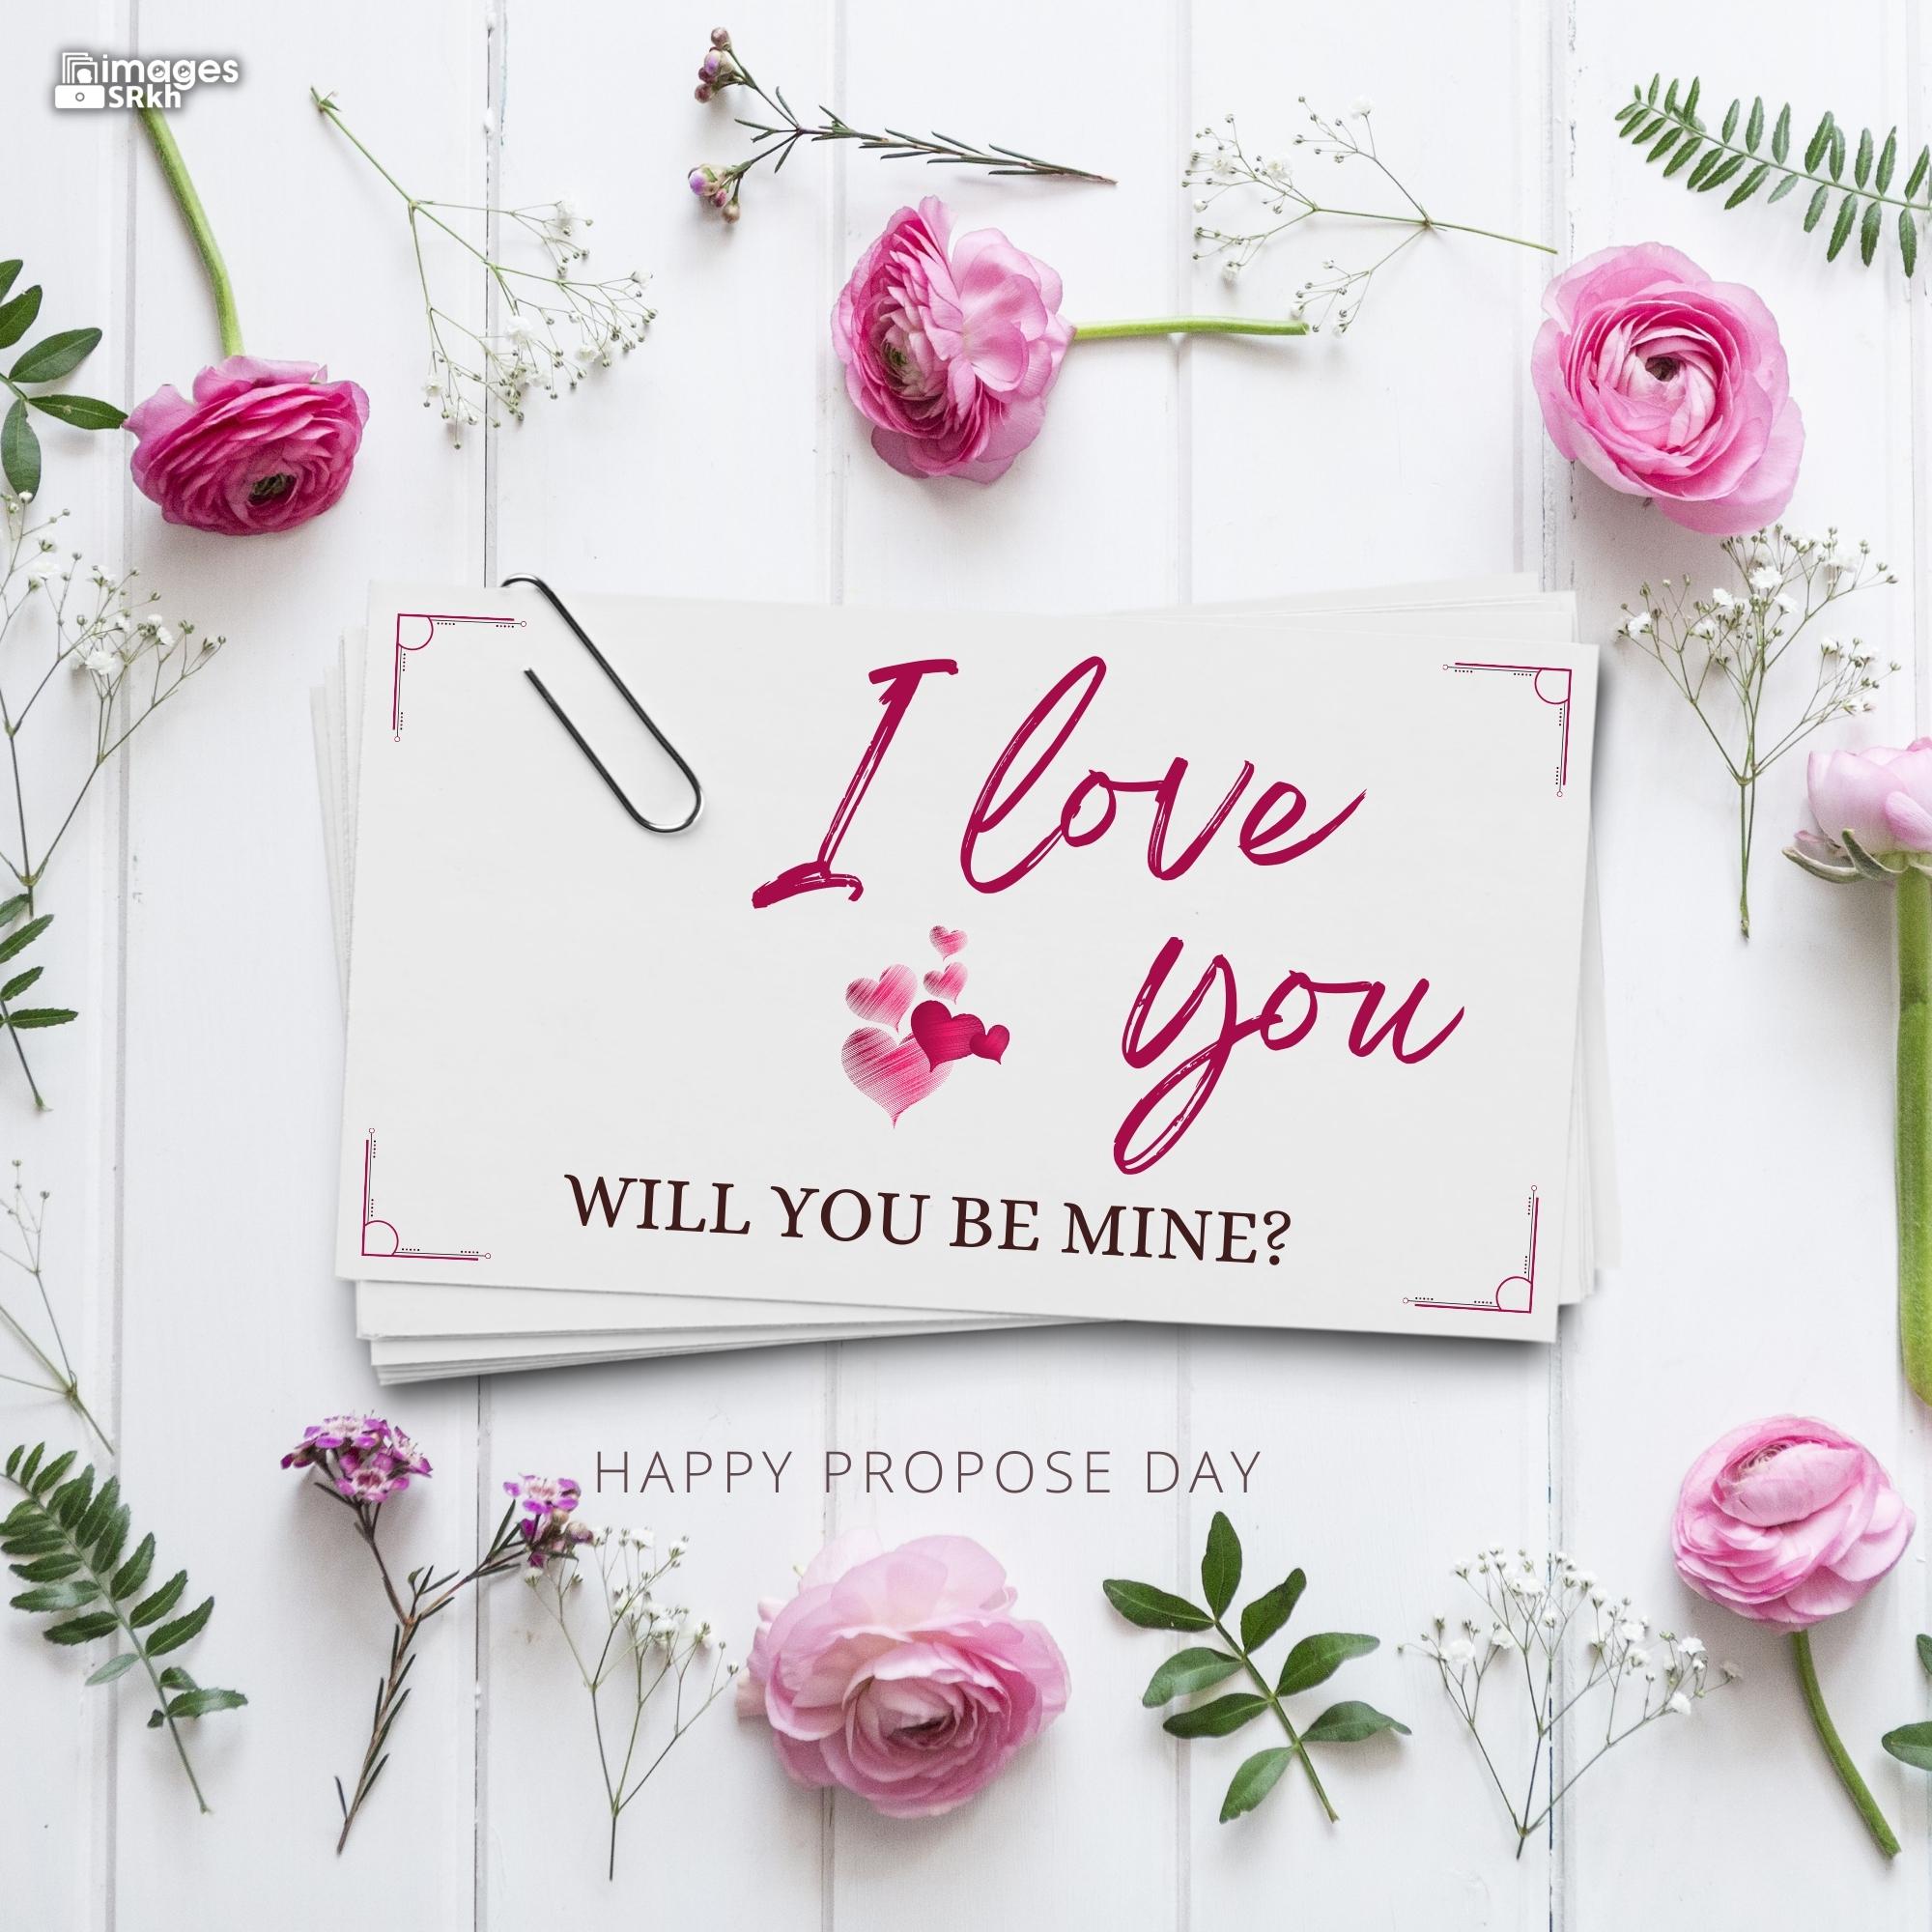 Happy Propose Day Images | 435 | I love you will you be mine